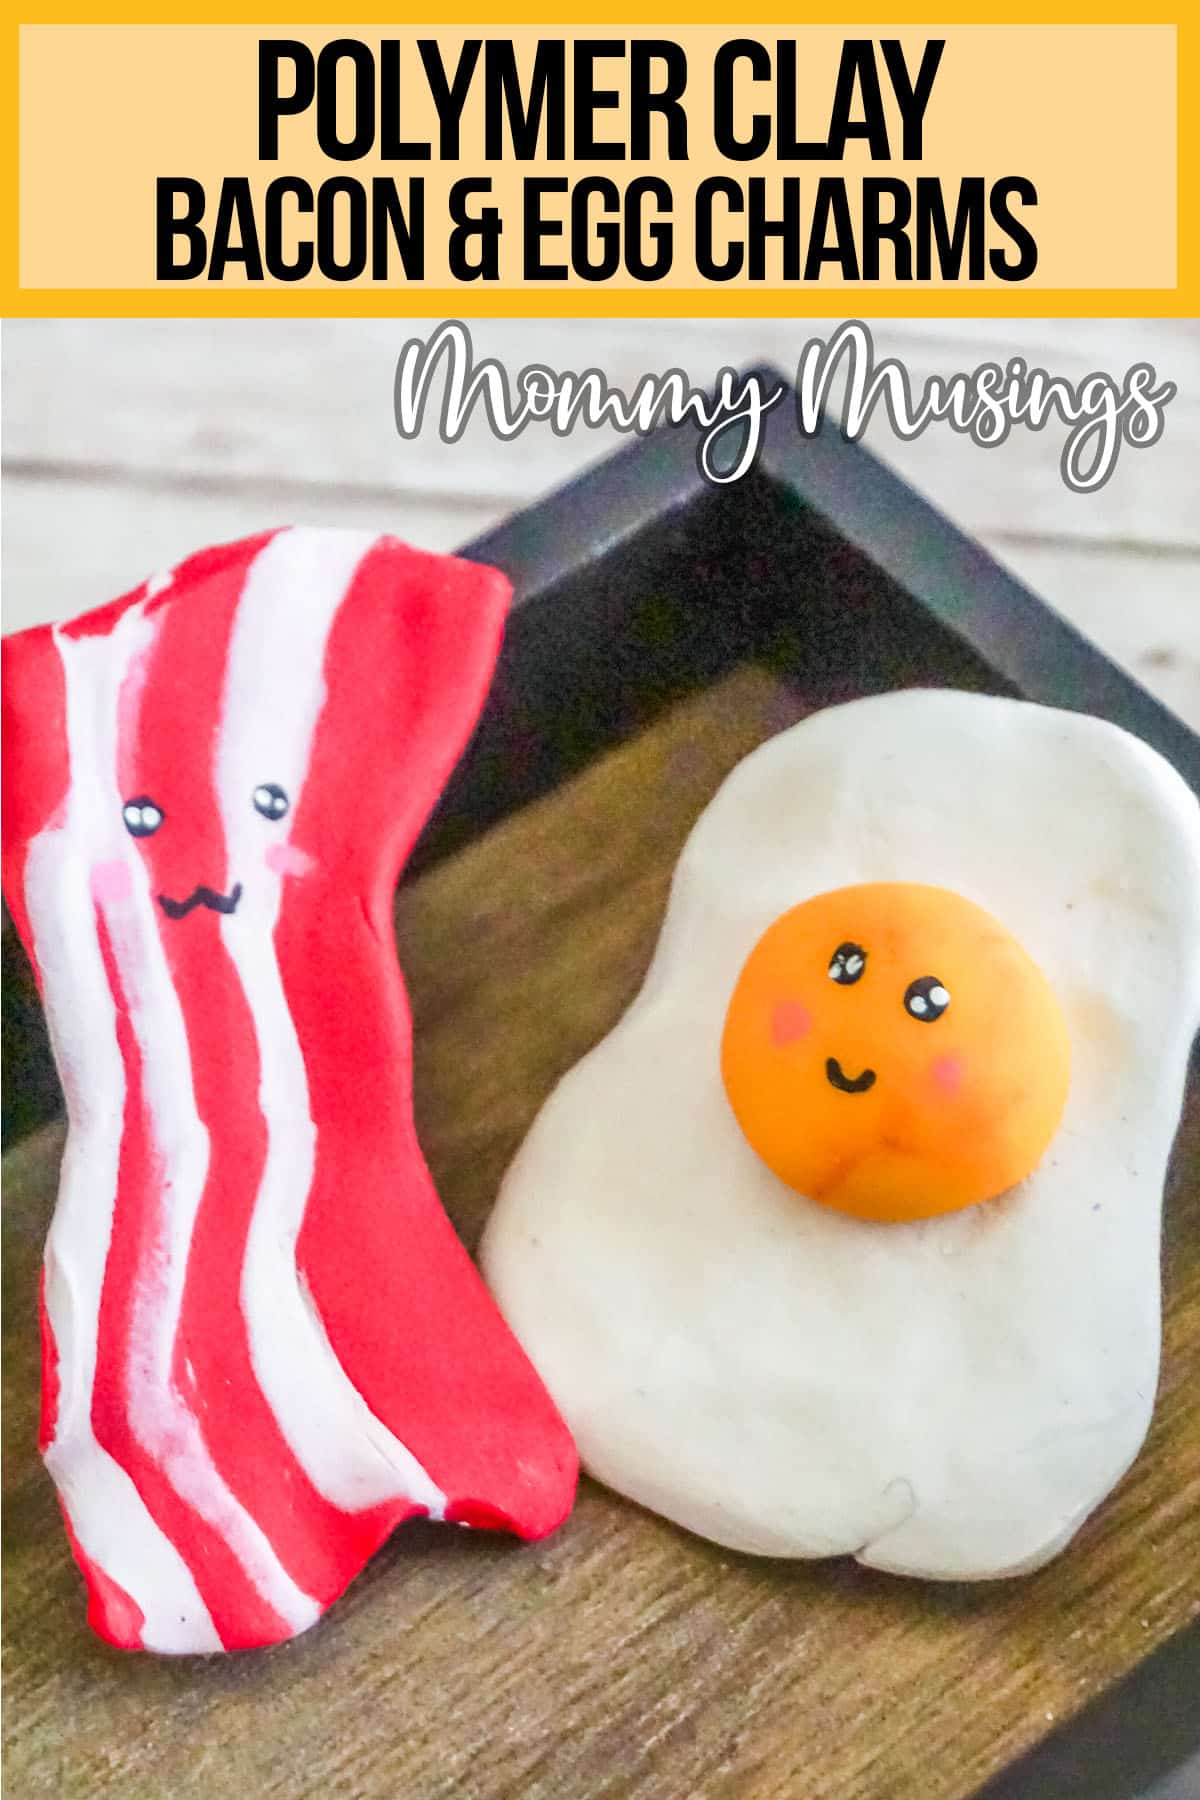 bacon and egg best friend craft for kids with text which reads polymer clay bacon & egg charms